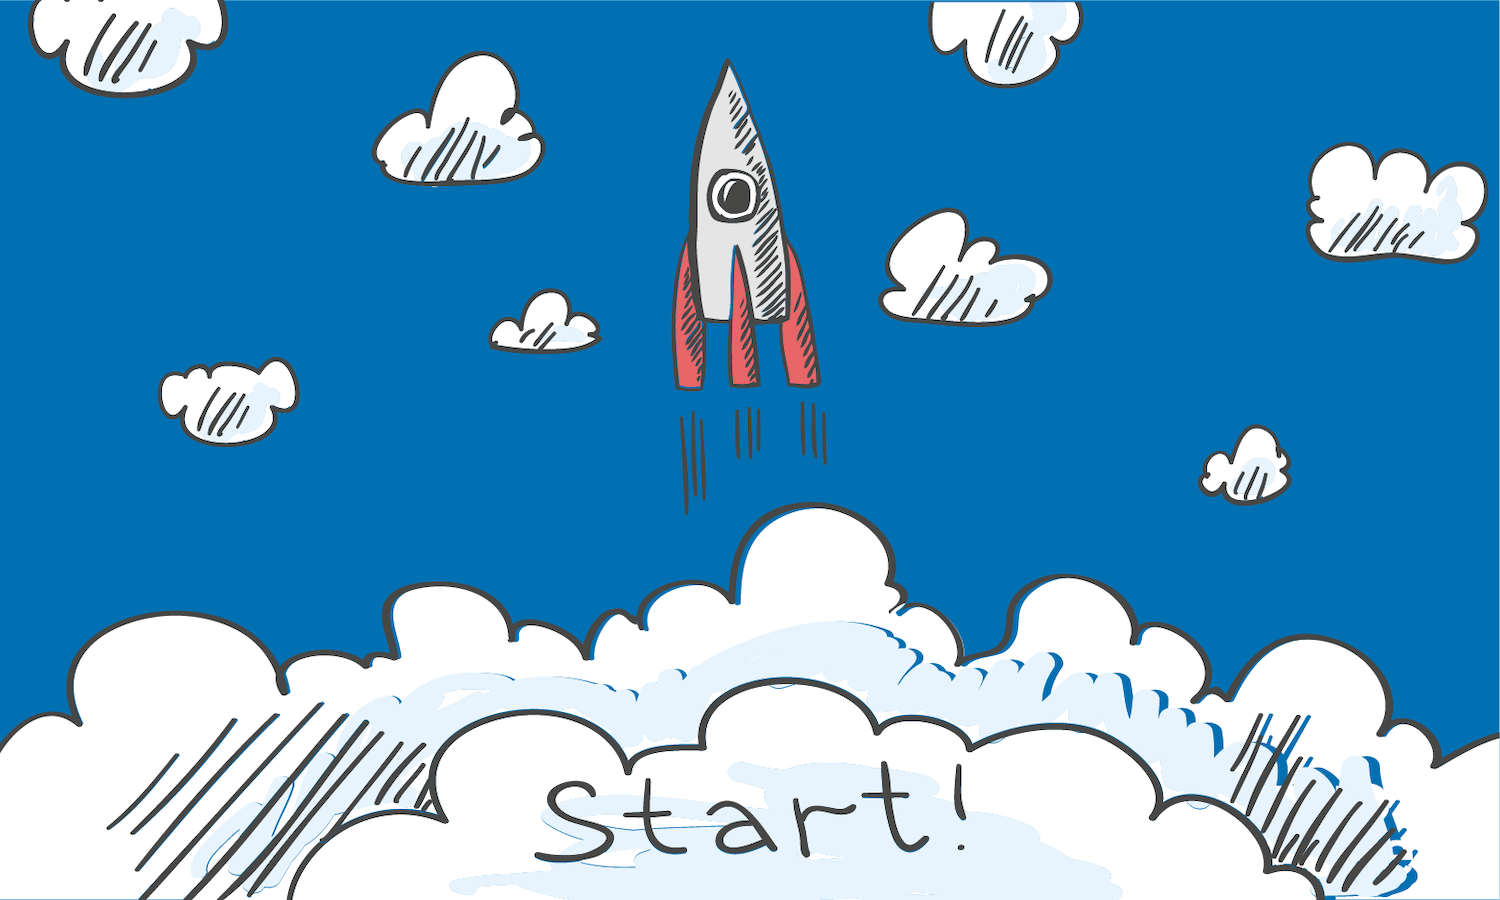 kickstart business with rocket flying in the sky